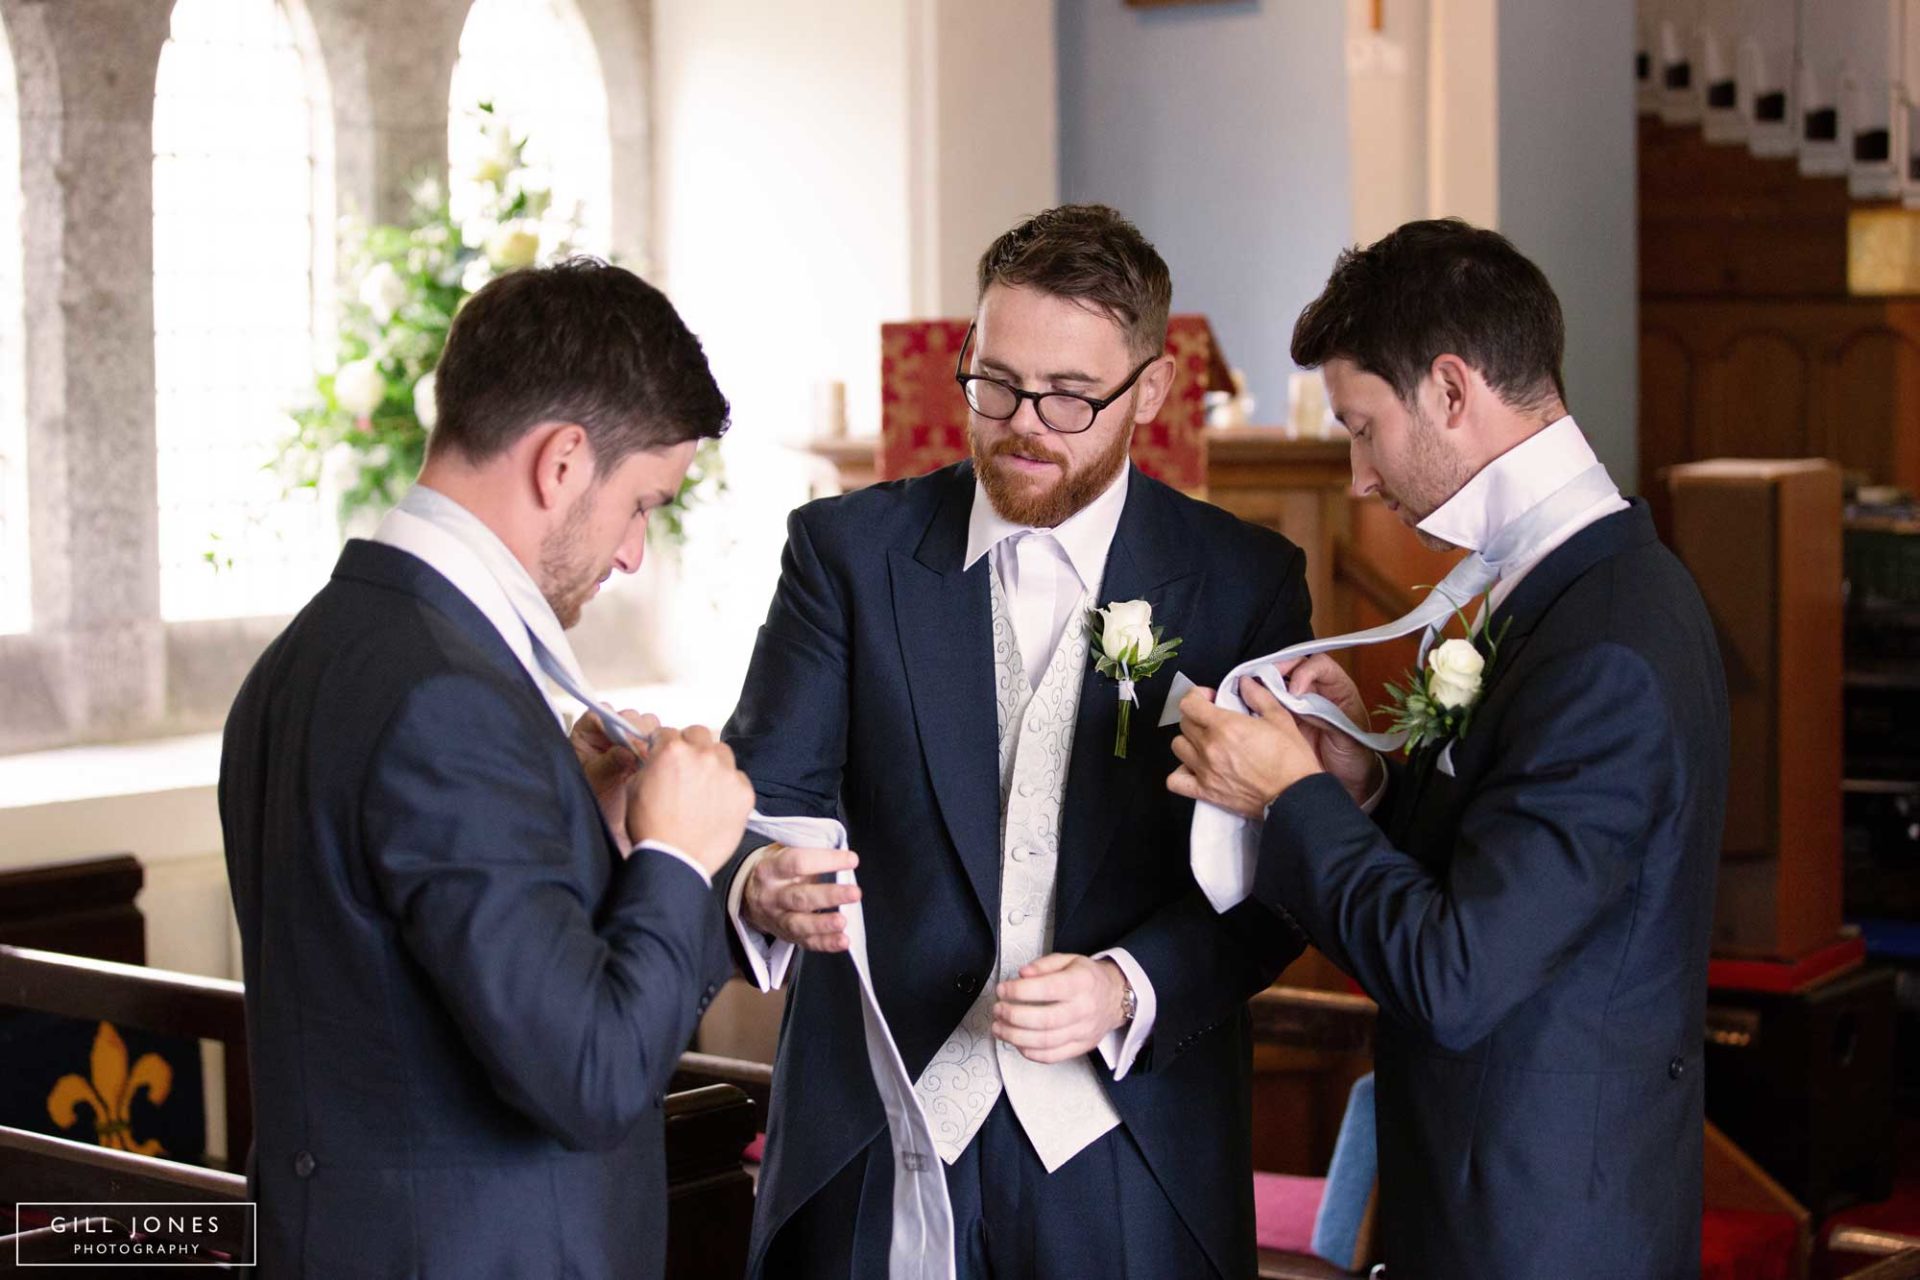 the groom tieing his tie